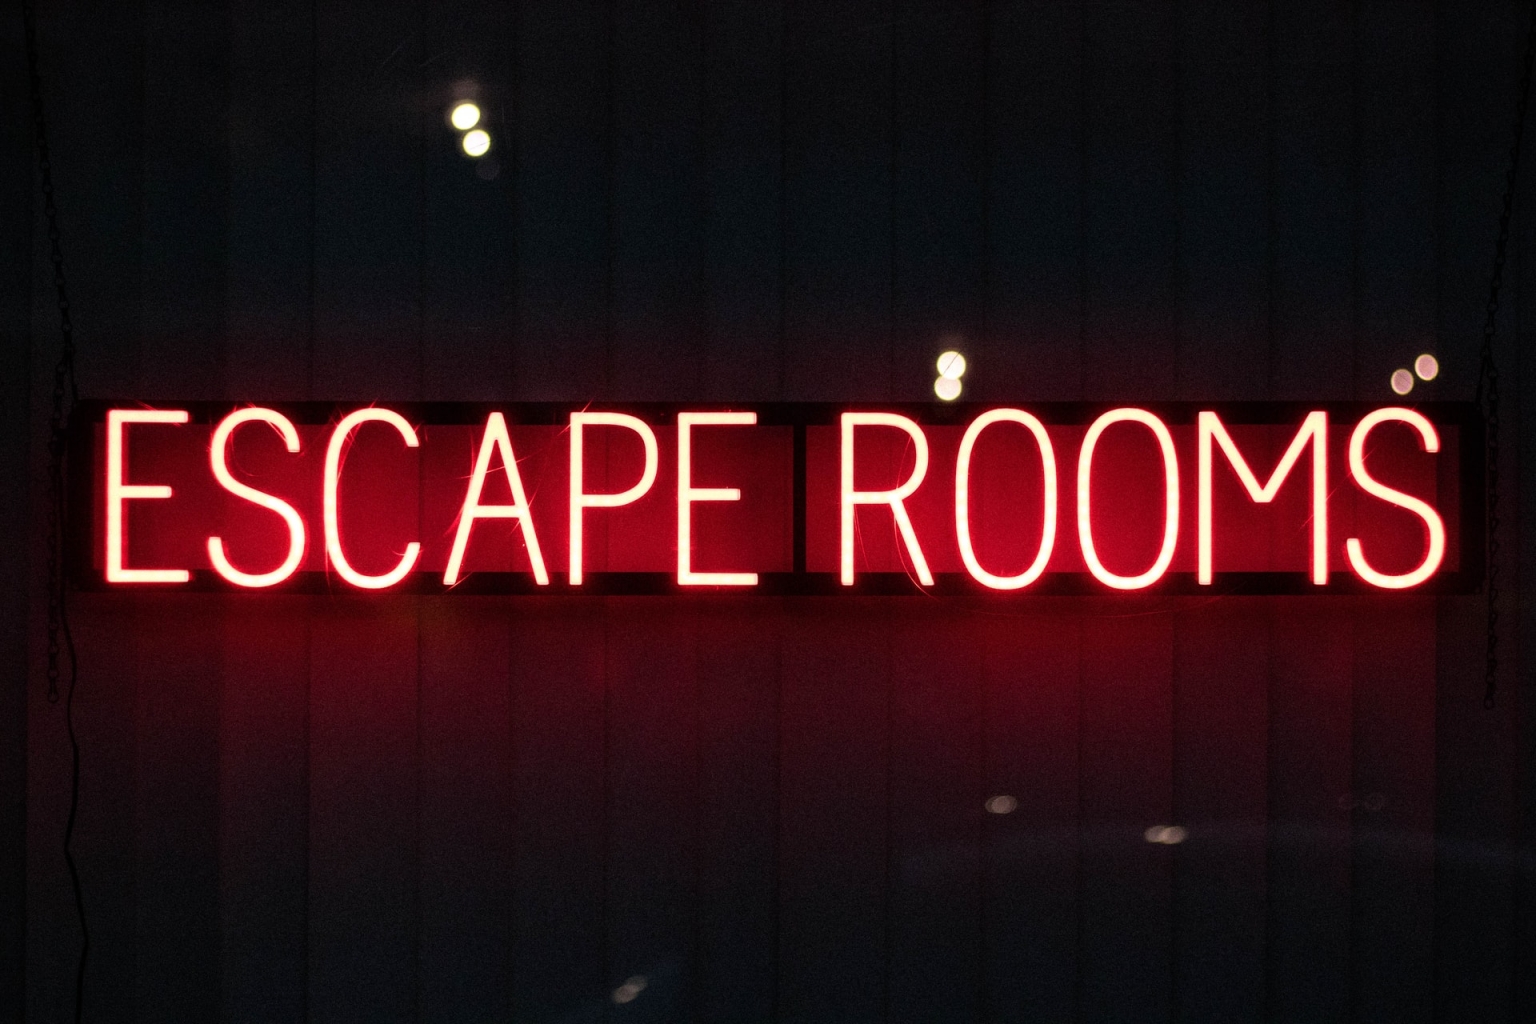 3 things you probably didn’t know about escape rooms